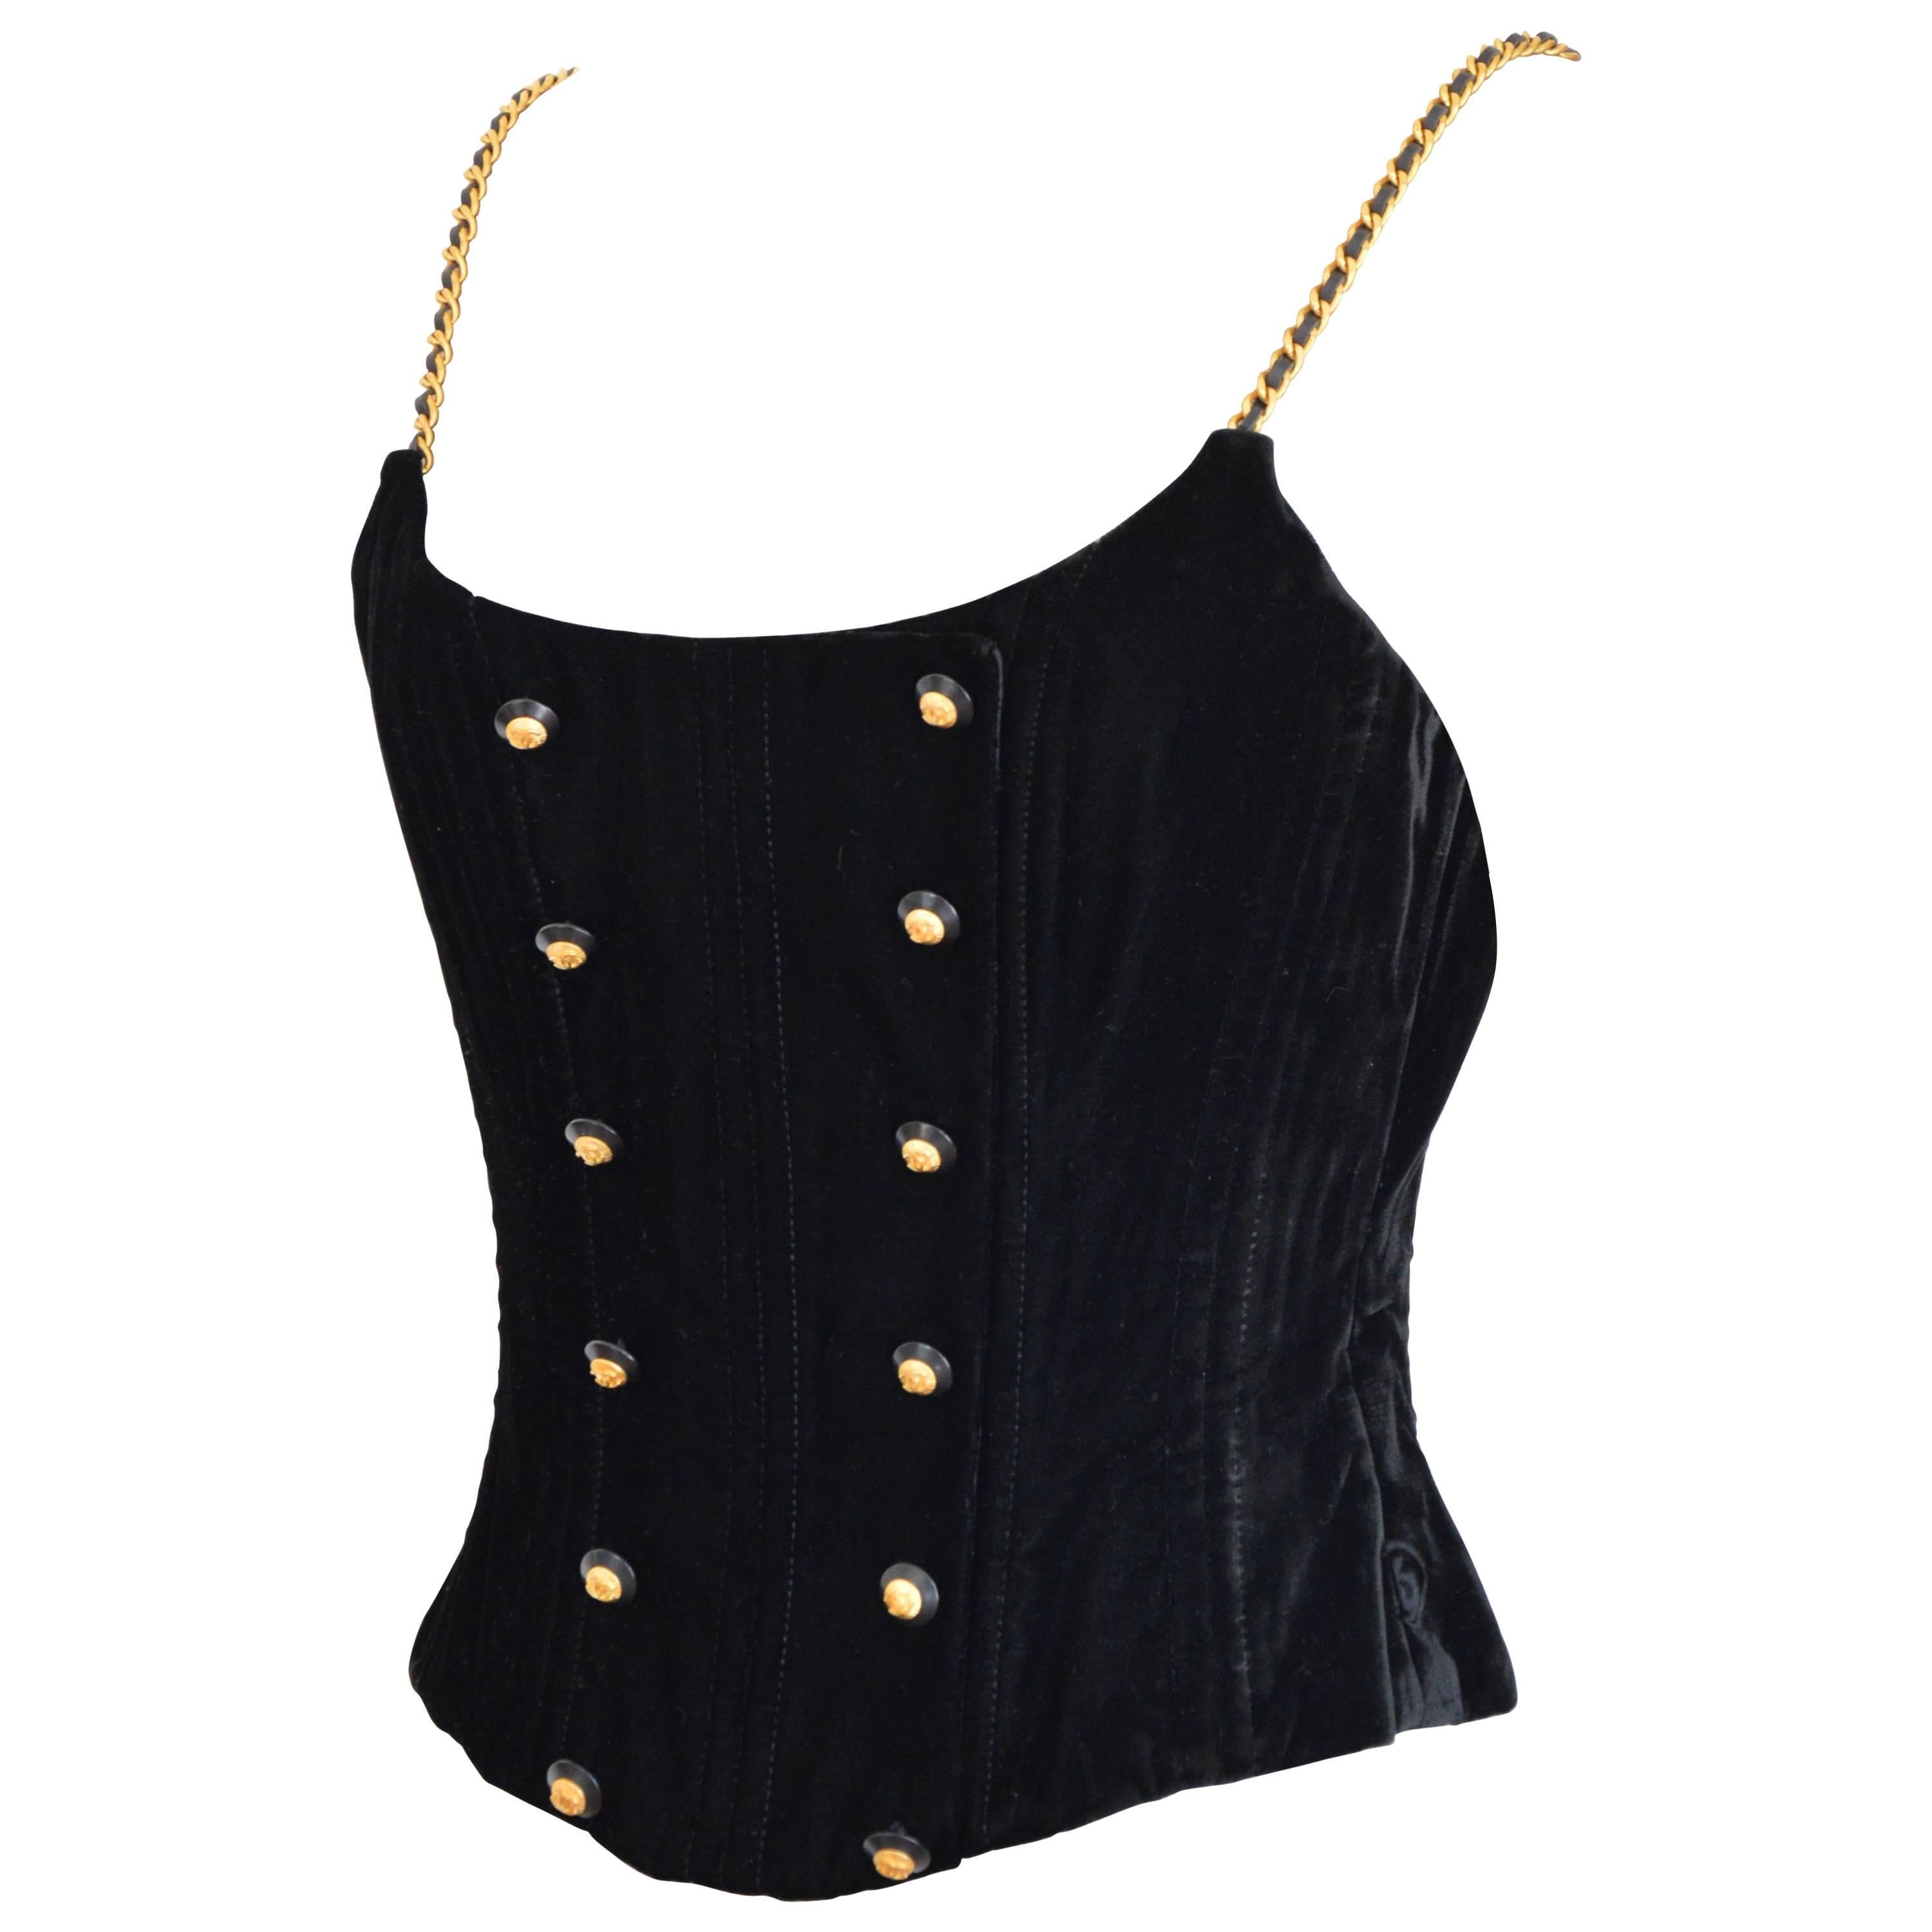 Very cool and still classic with this Chanel made of black velvet, chanel logo buttons, gourmette and black leather shoulder straps. 
Fr size /36 but will fit also a 38 - corresponds to a XS-S.
Excellent condition. Chanel corset of 1993.